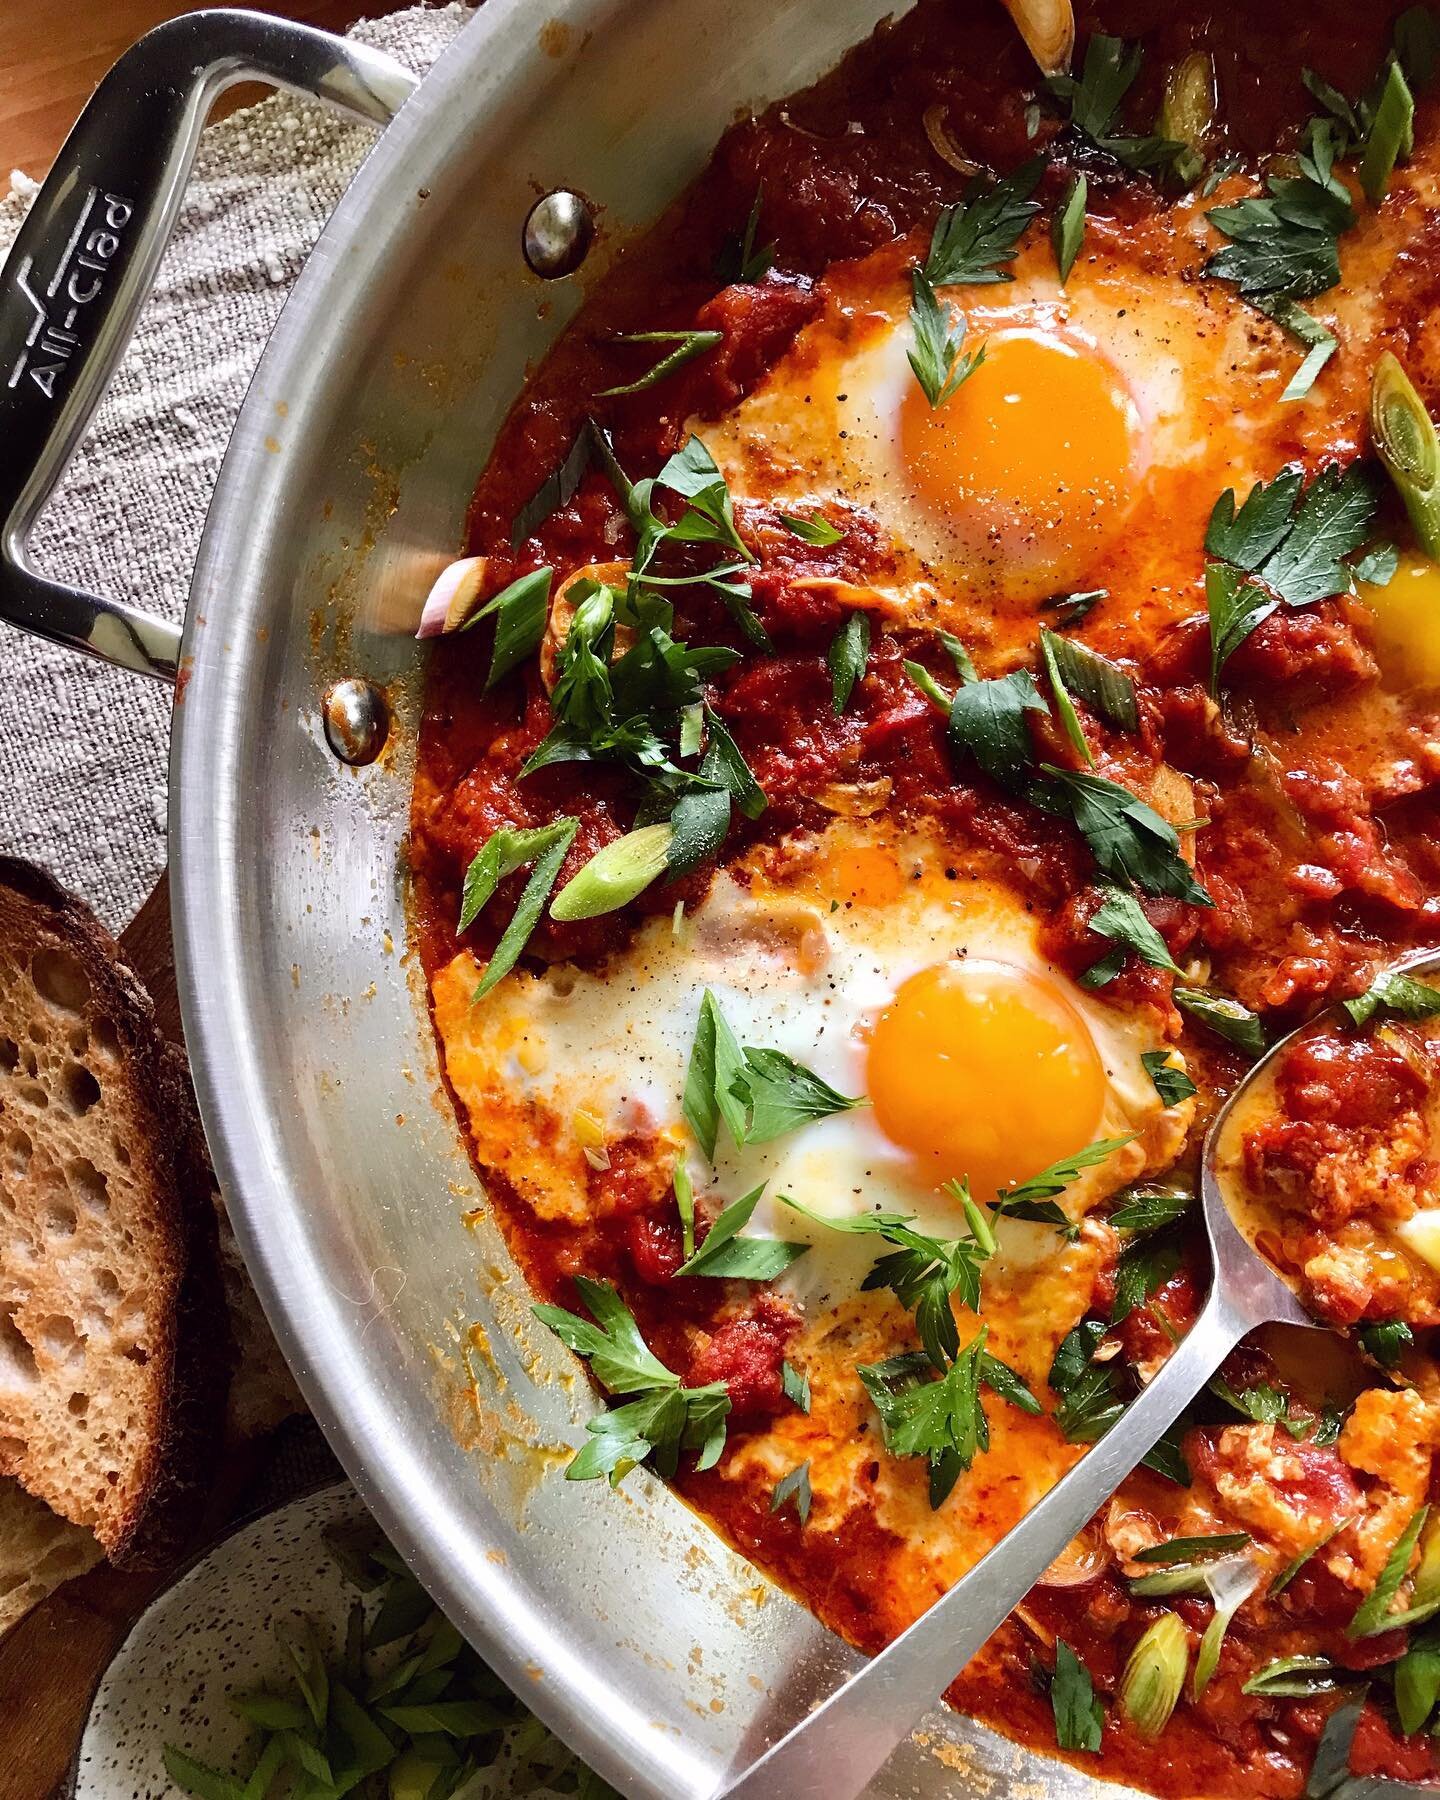 #Ad I make jammy shakshuka for @catbirdcottage guests, family, and anytime I want a special-feeling meal. This version is one of my favorites, with green garlic &amp; herbs from the garden. I especially love using the All-Clad D3 Stainless universal 